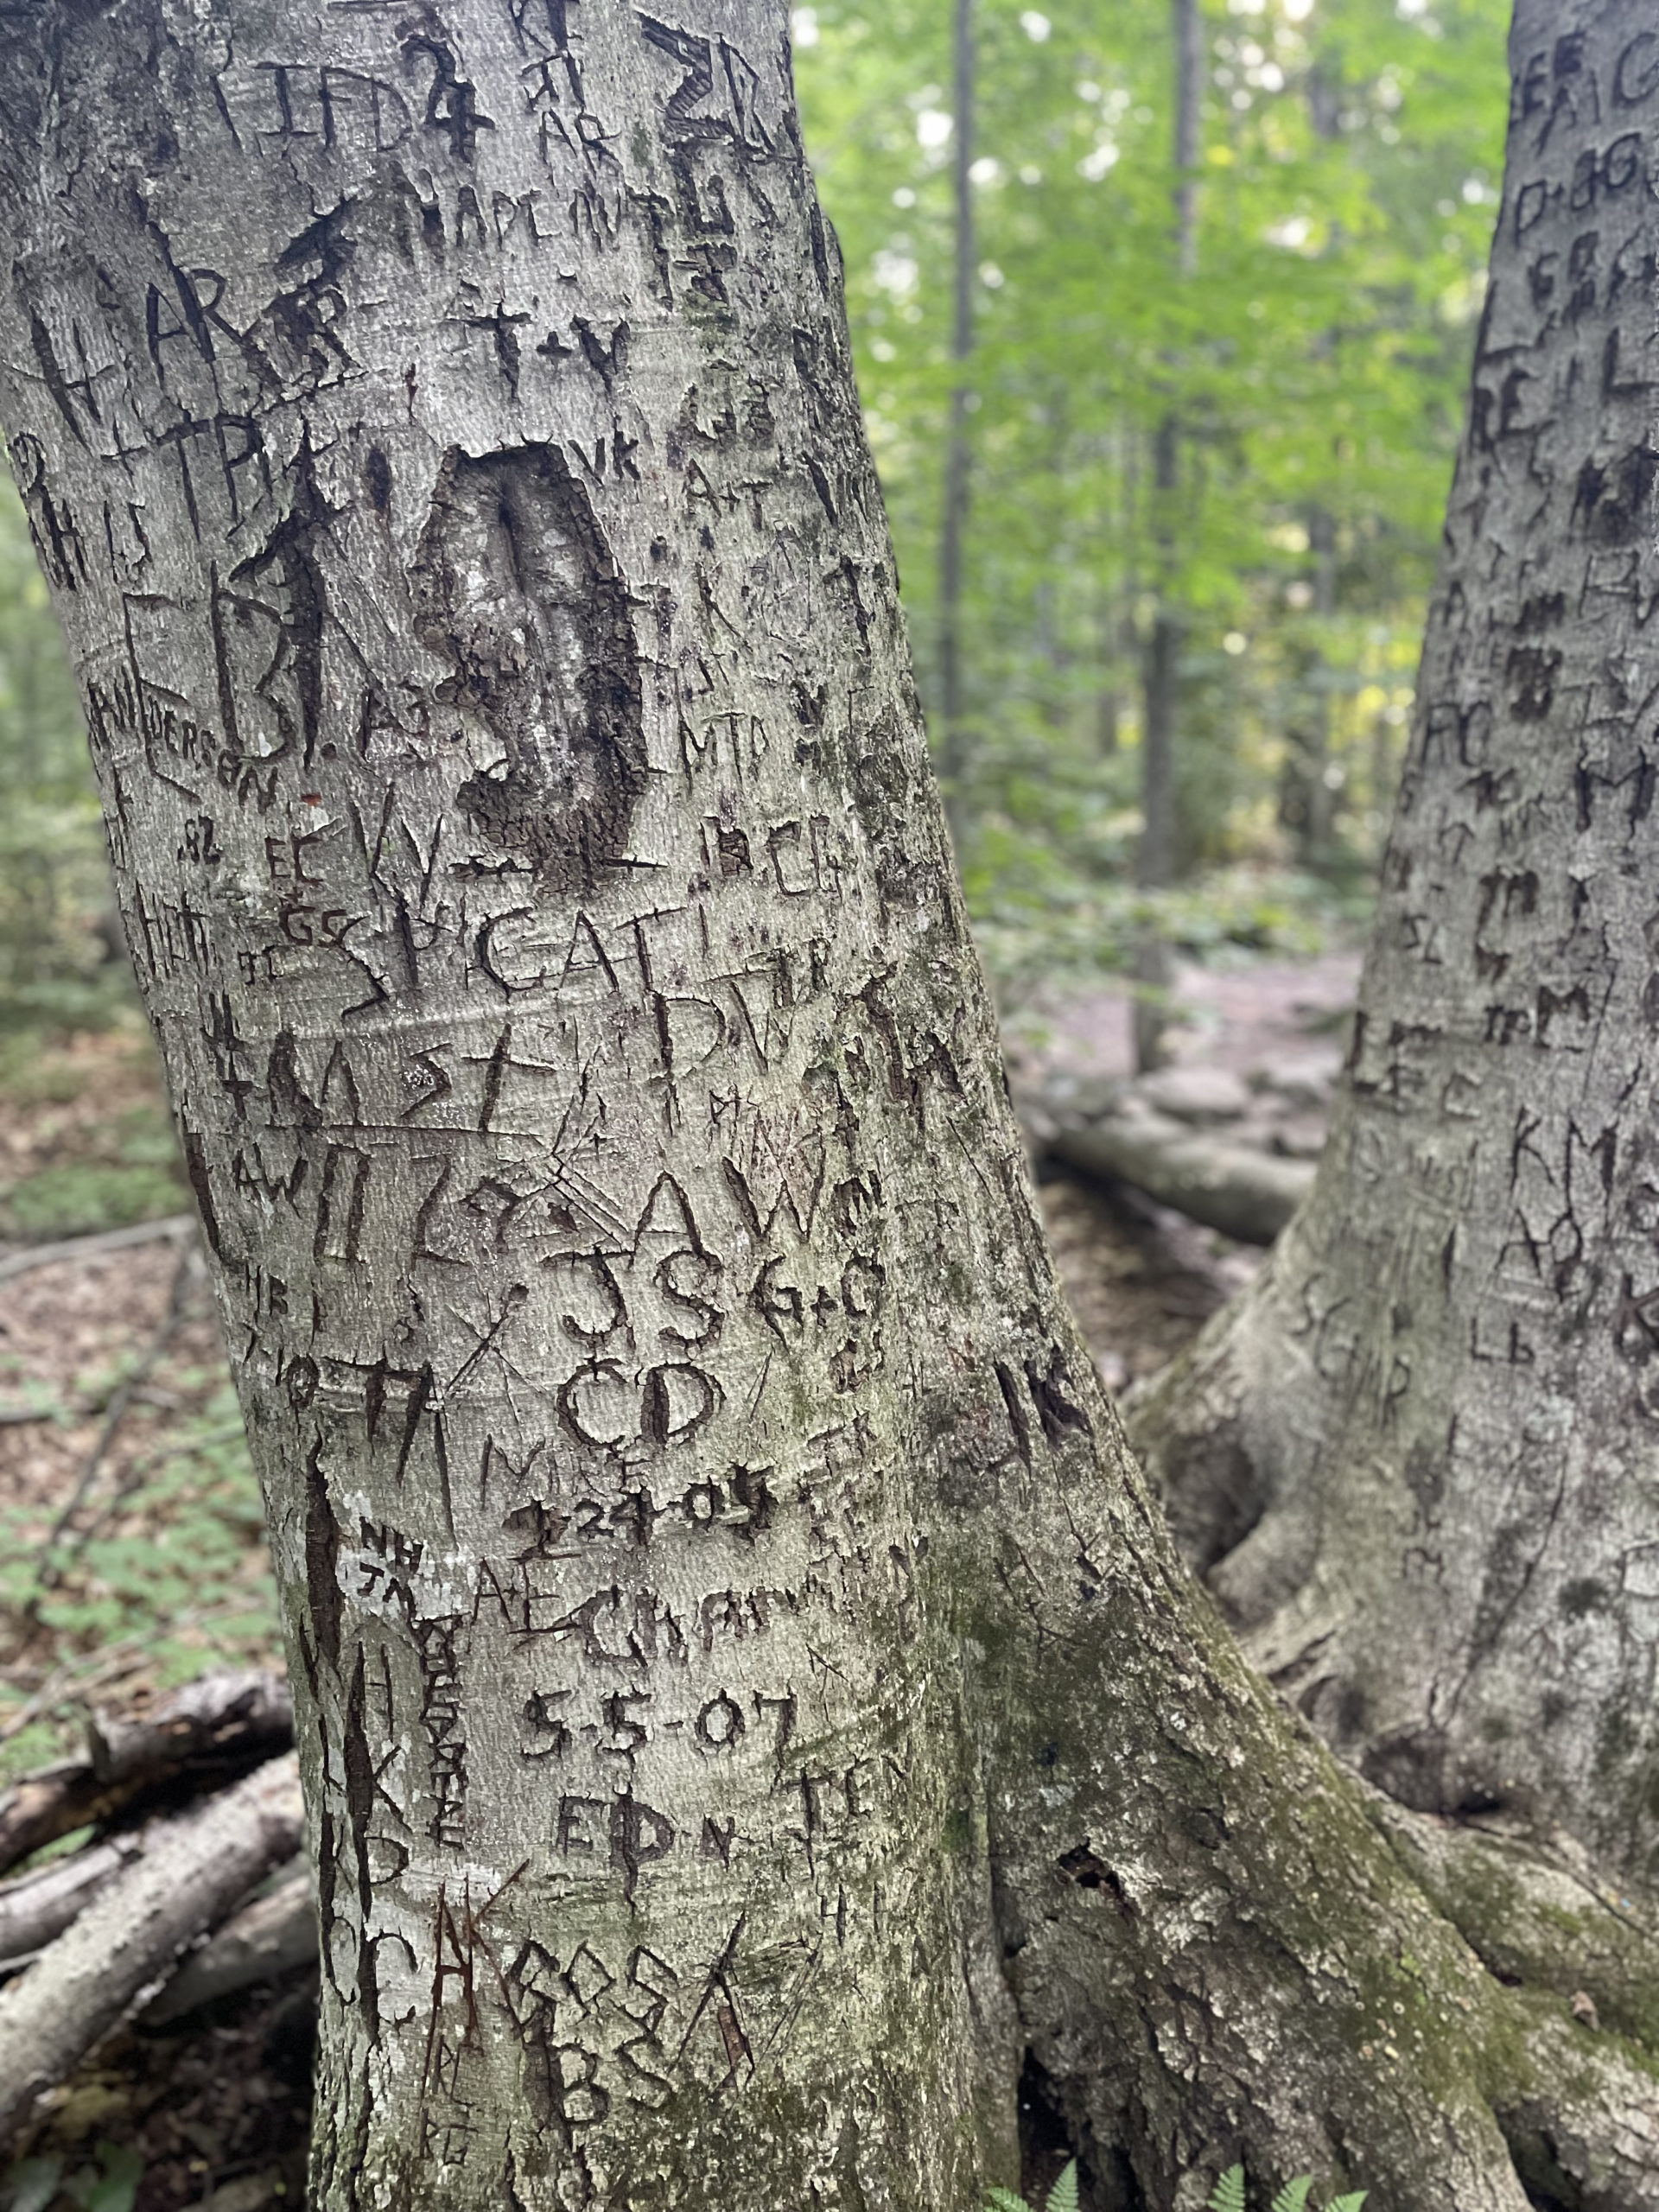 Initials carved into a tree, seen while hiking Camel's Hump in the Green Mountains, Vermont